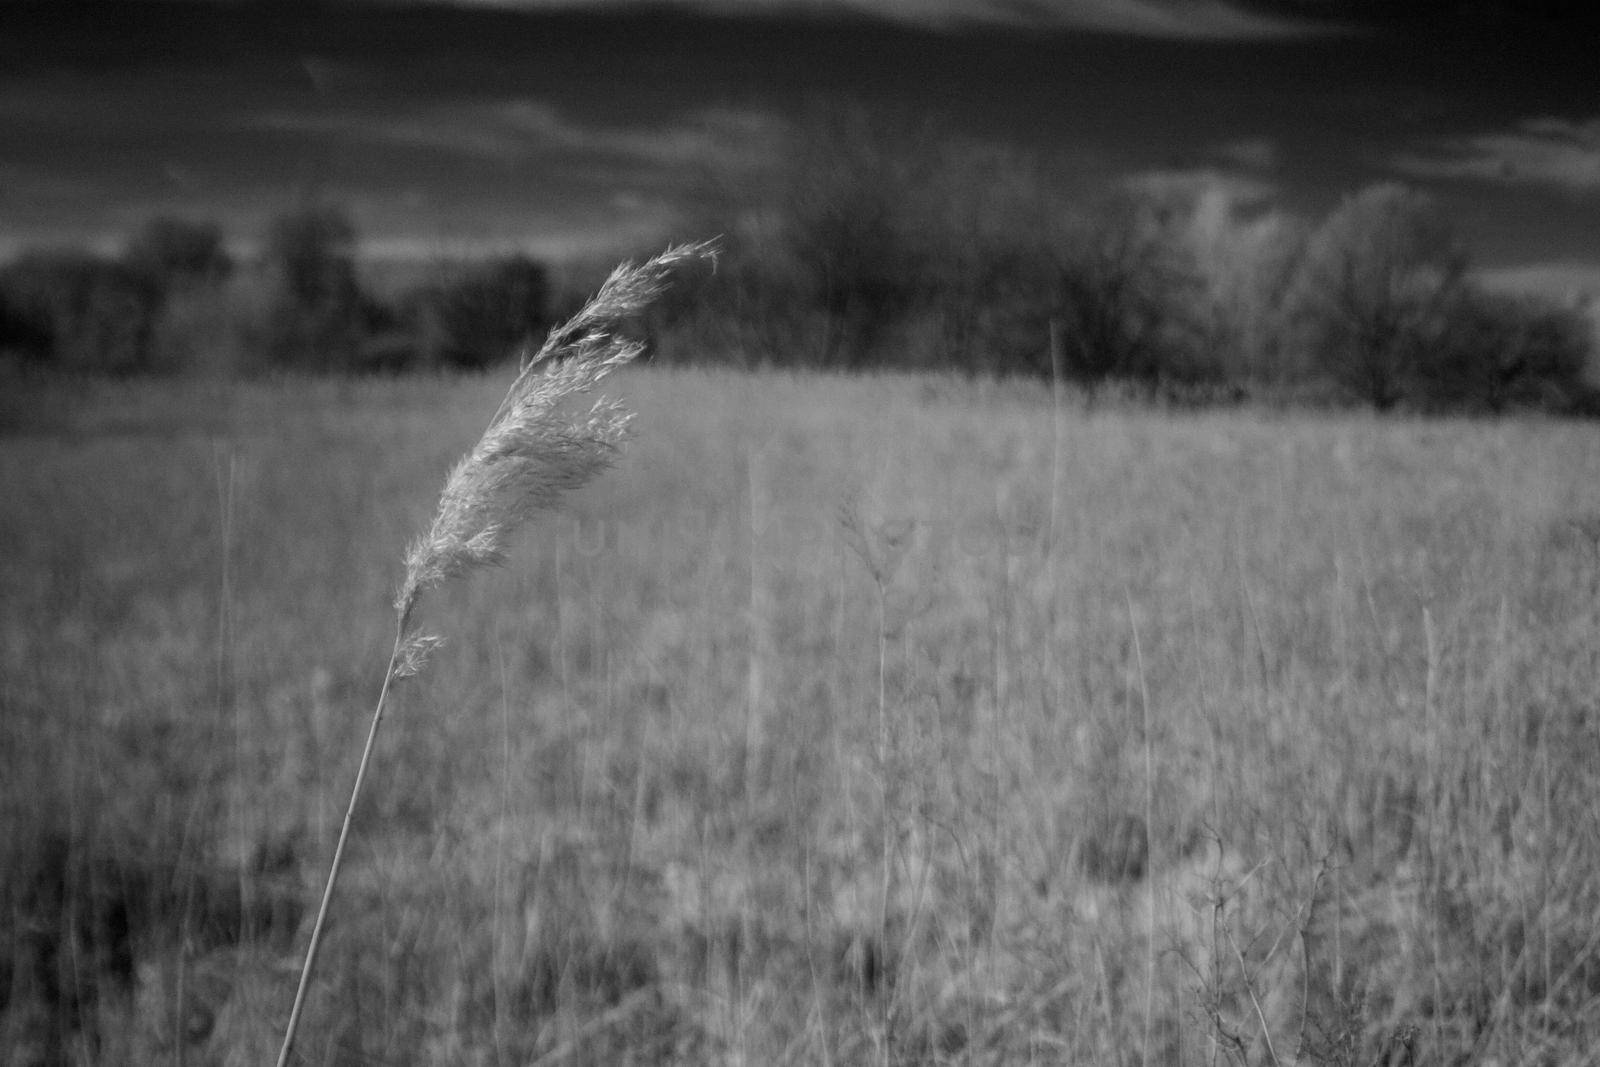 Infrared photo of a single feather reed grass blowing in the wind, with a field in the background. Black and white photo taken in British summer time, Hertfordshire.